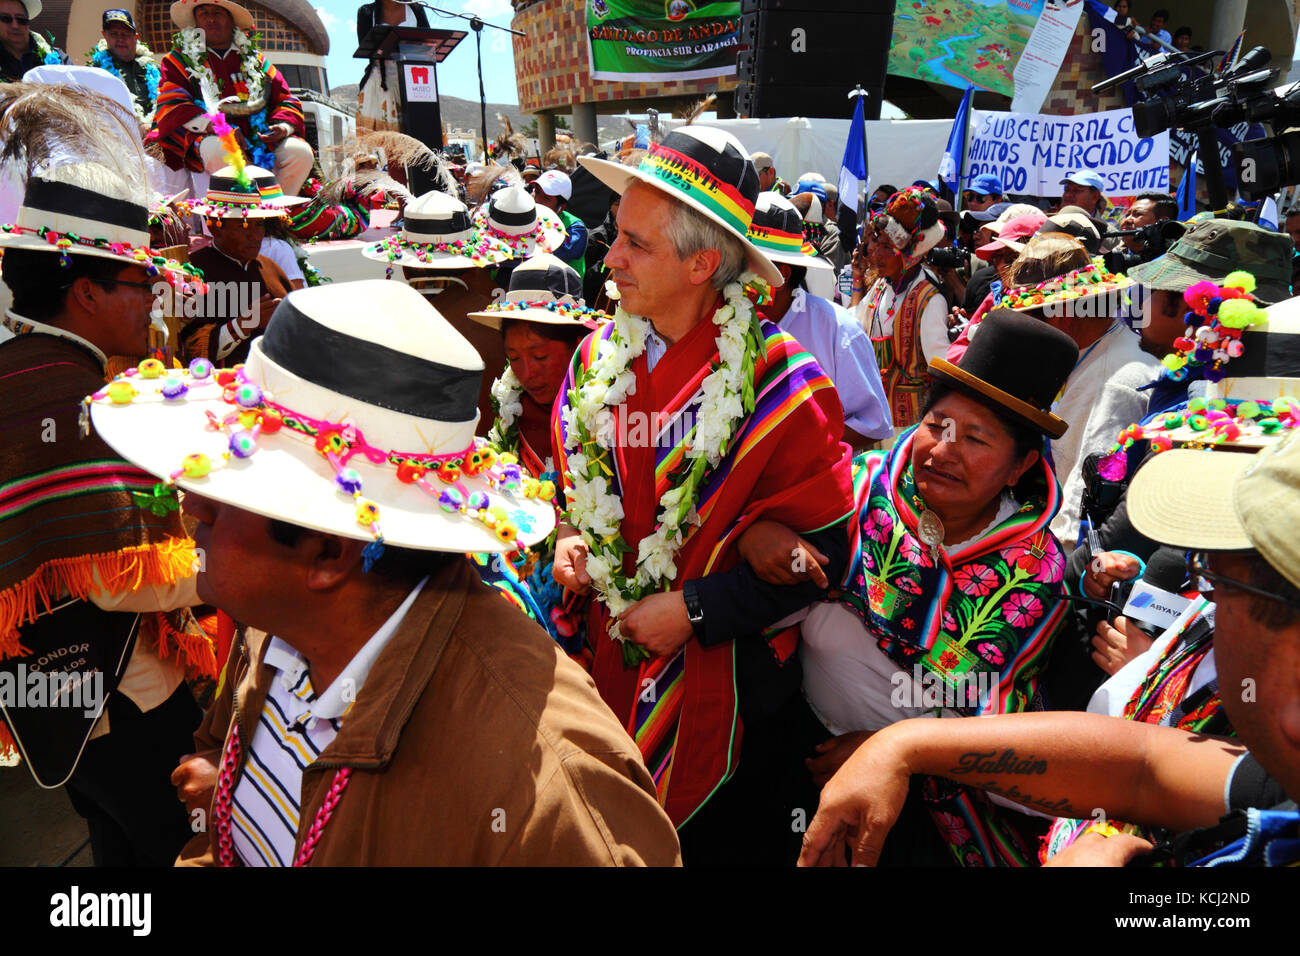 Bolivian vice president Alvaro Garcia Linera (centre) dances with indigenous supporters wearing traditional dress at political event, Orinoca, Bolivia Stock Photo